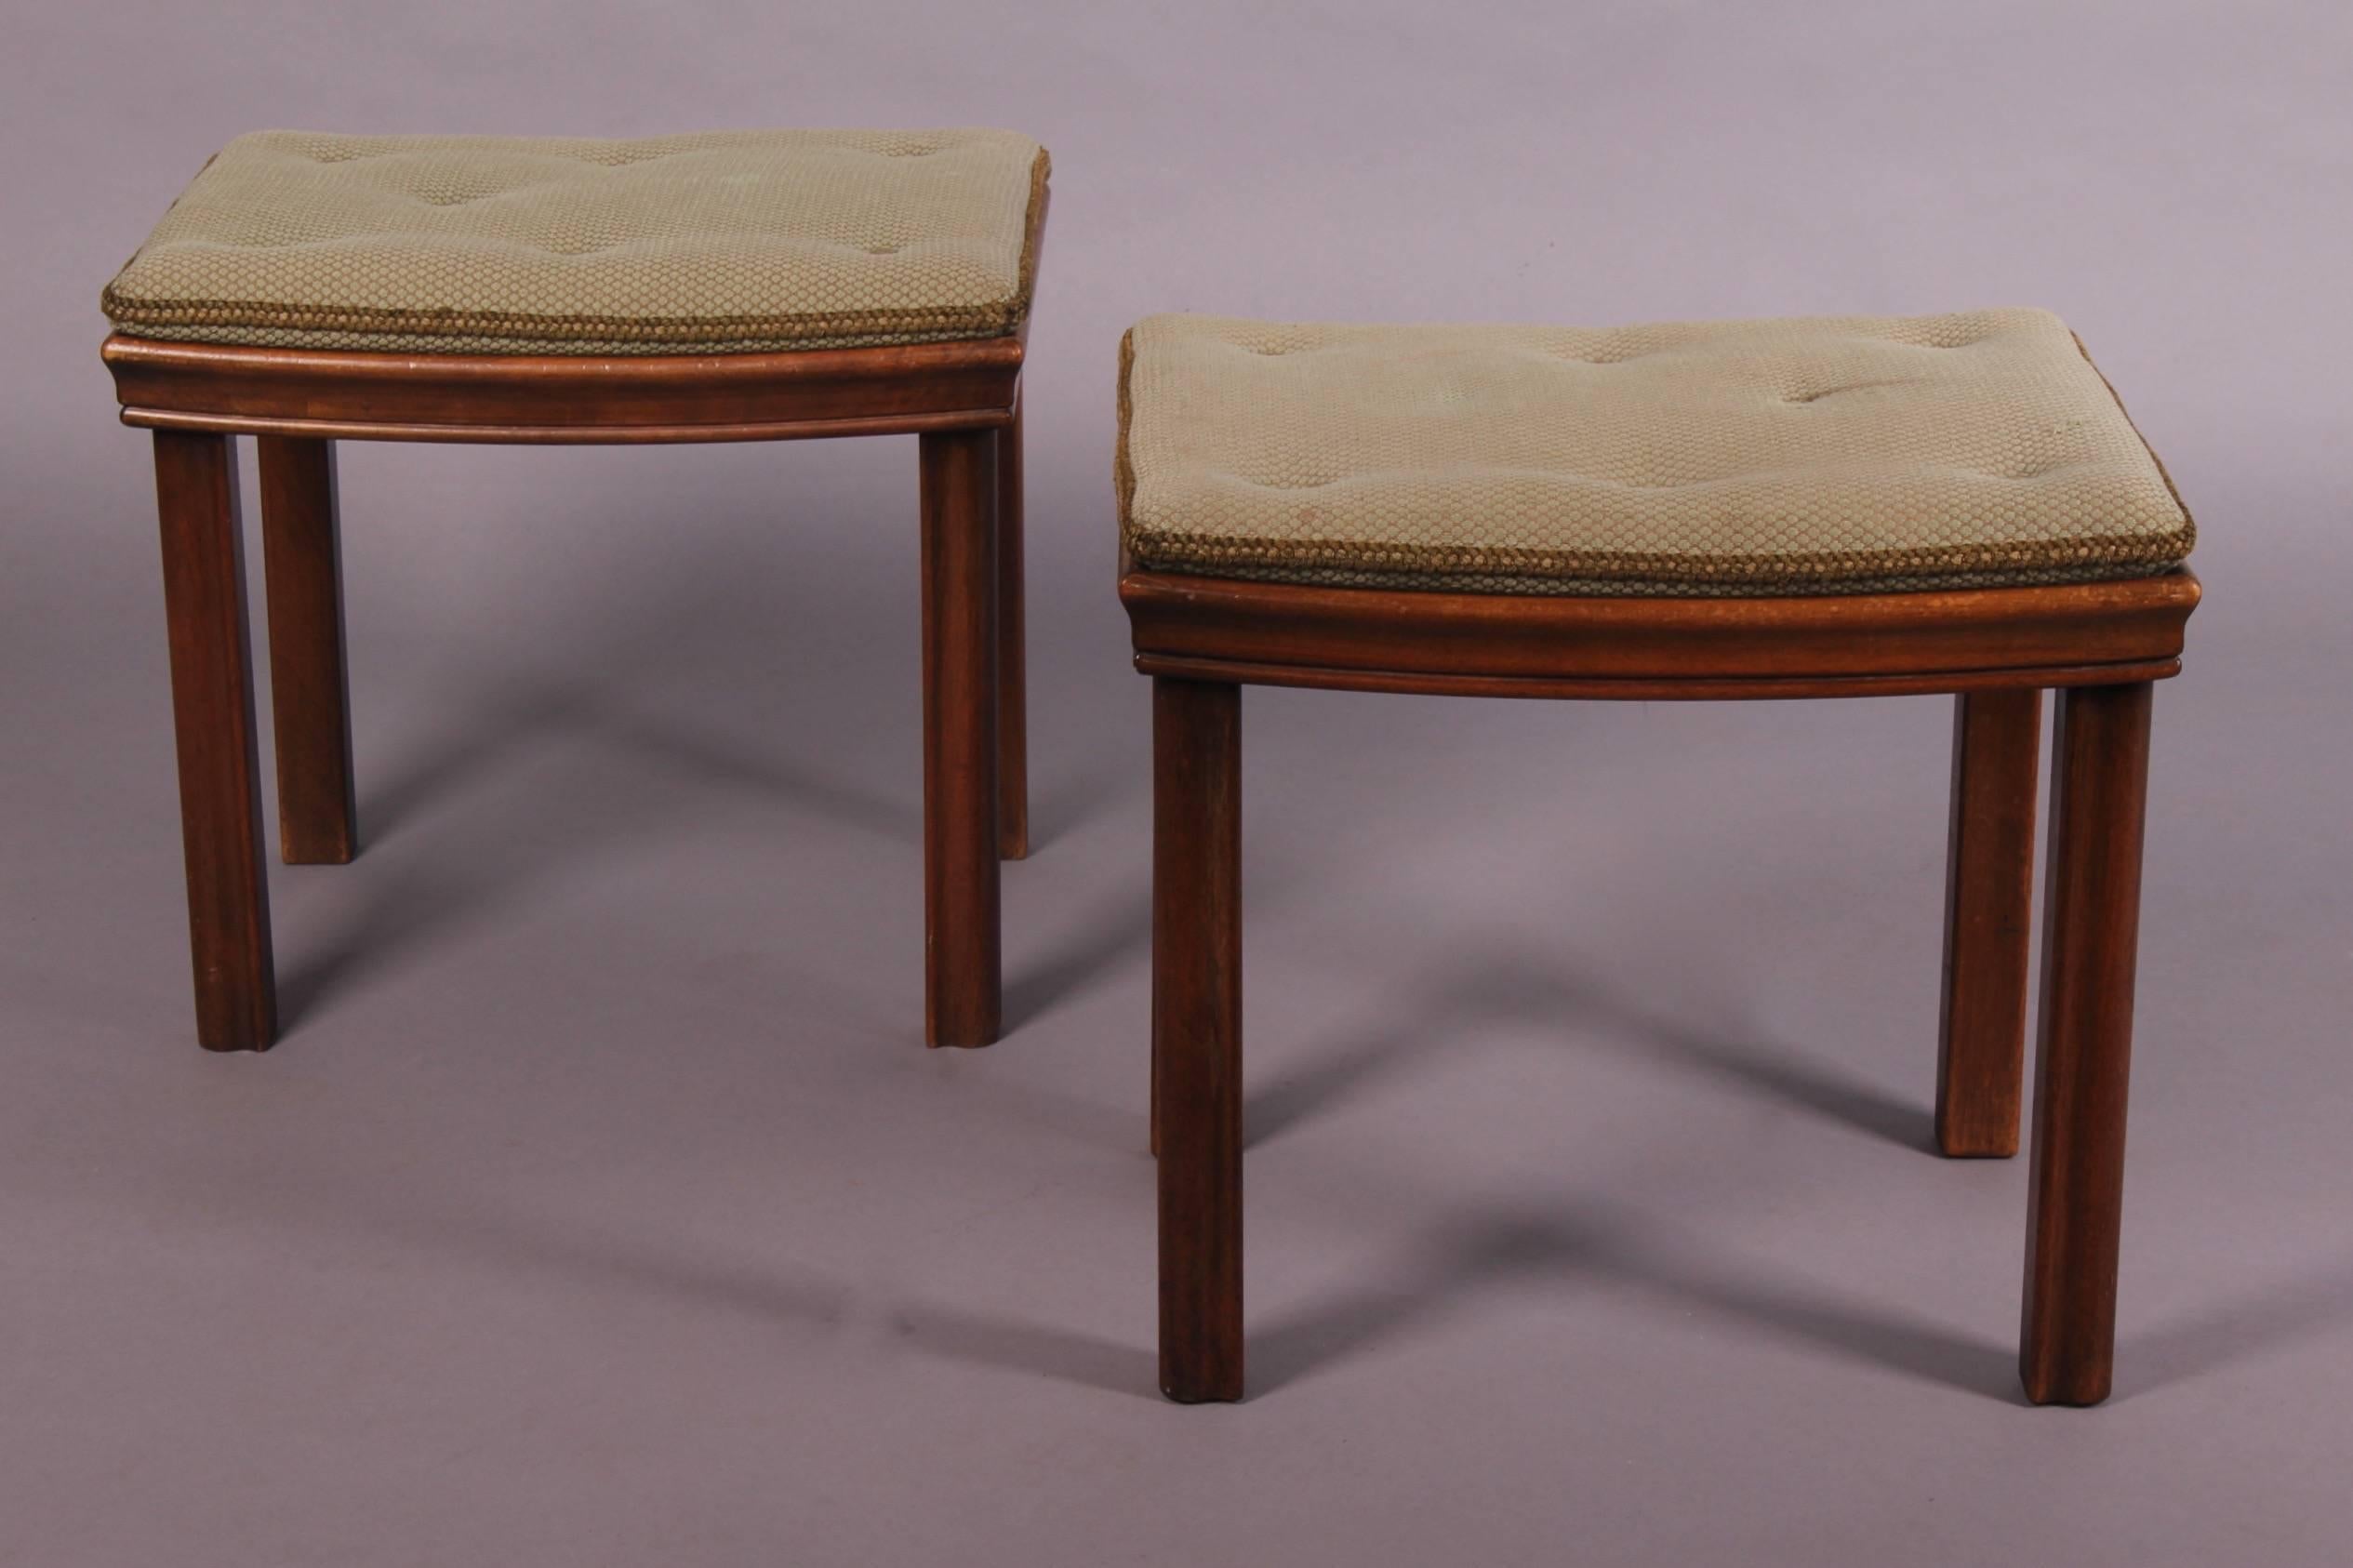 Early 20th Century Pair of Wood and Fabrics Stools